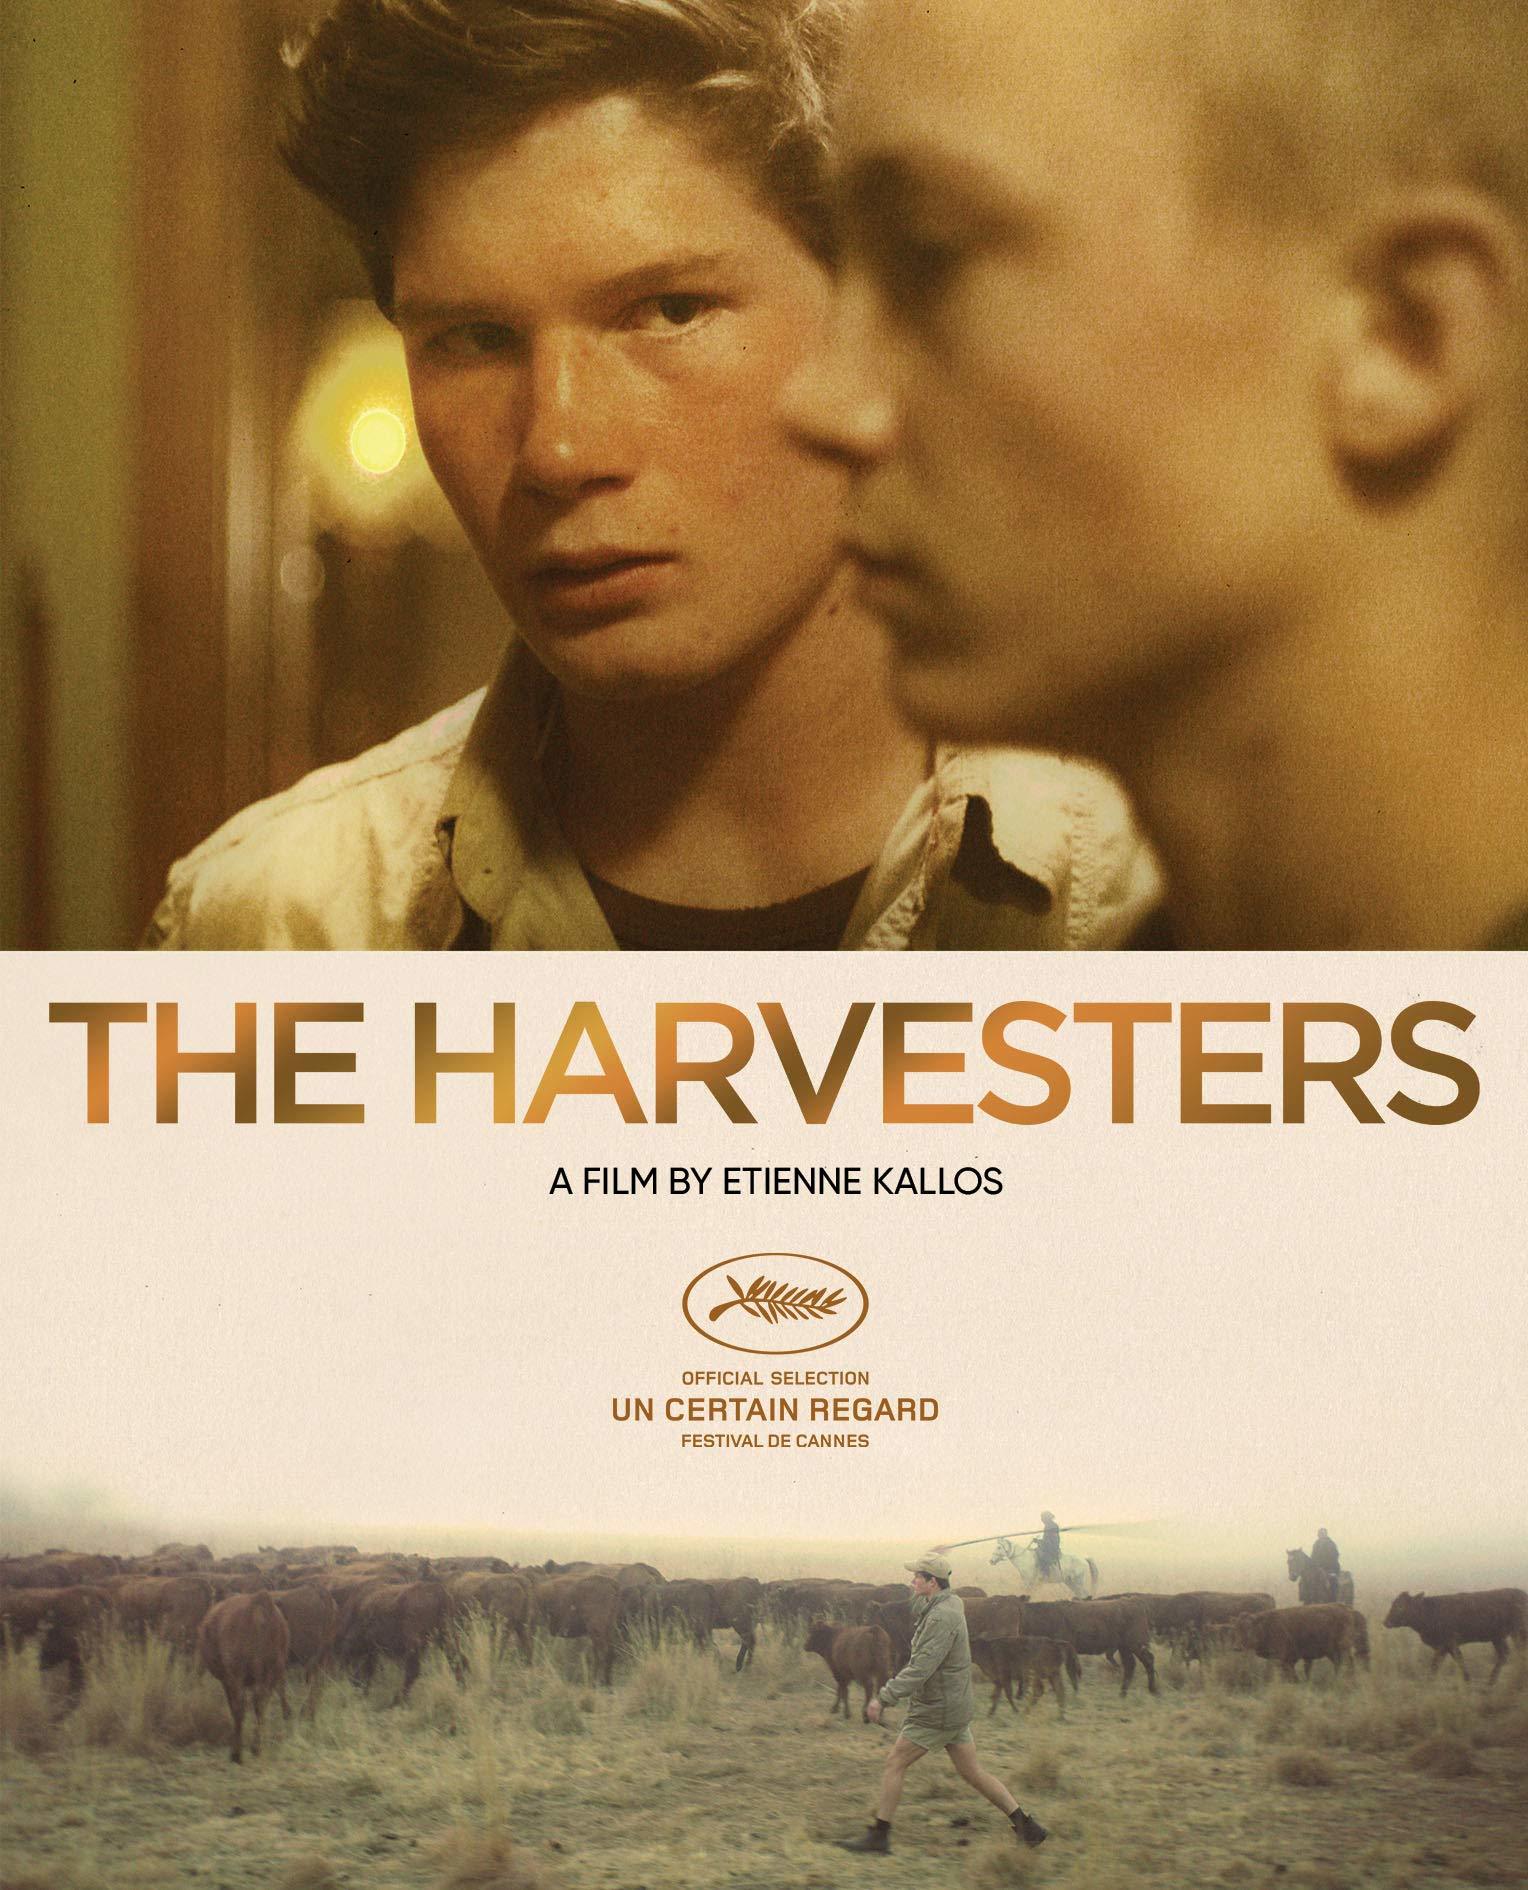 THE HARVESTERS BLU-RAY